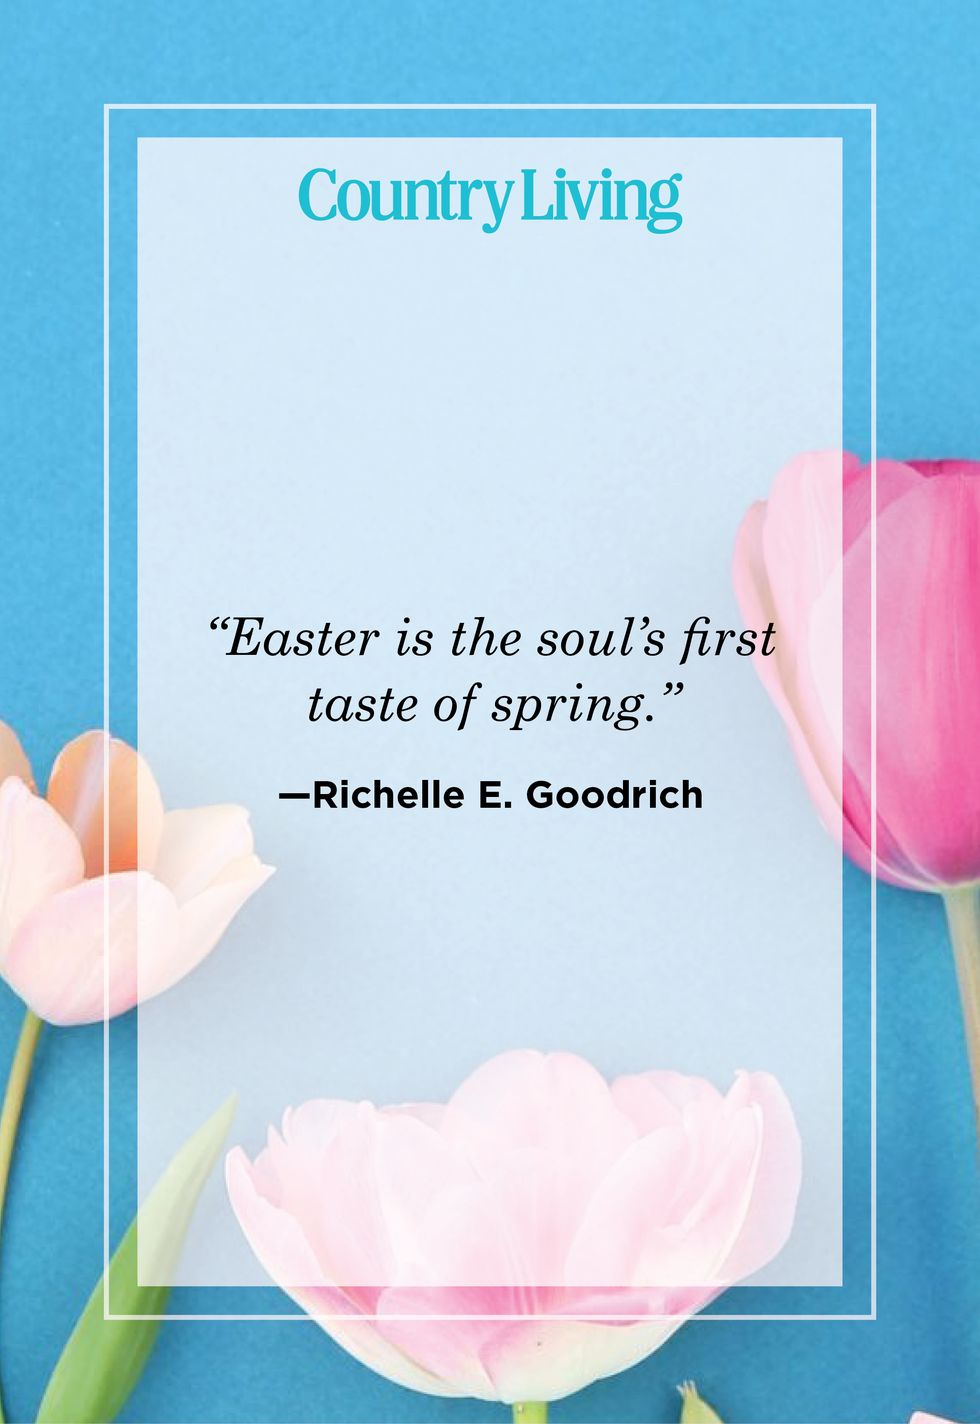 easter quote by richelle e goodrich with photo of pink tulips on blue background